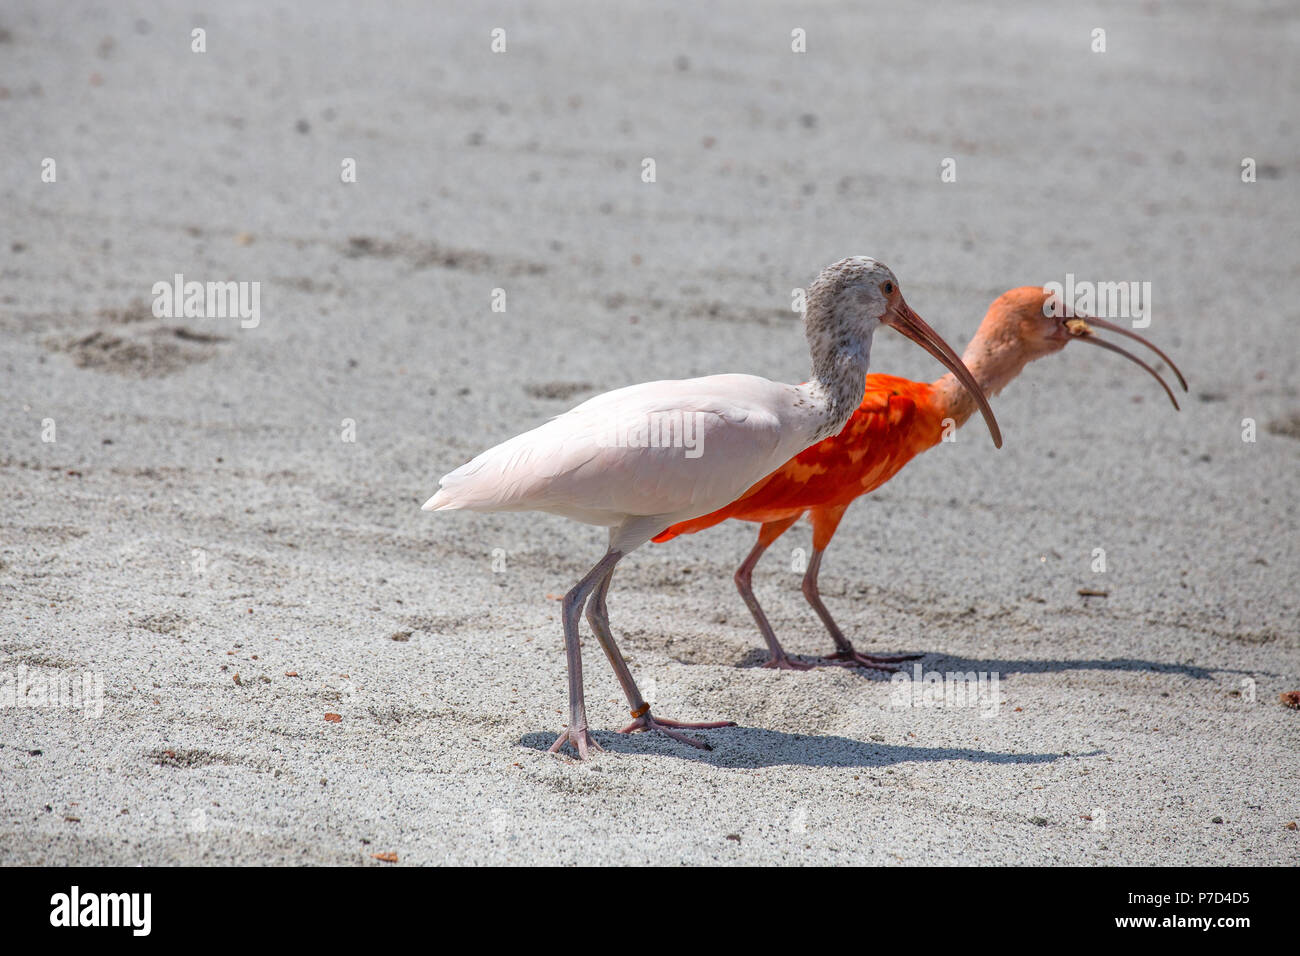 Couple of Ibis bird, one red and one white walks on the dust. Stock Photo